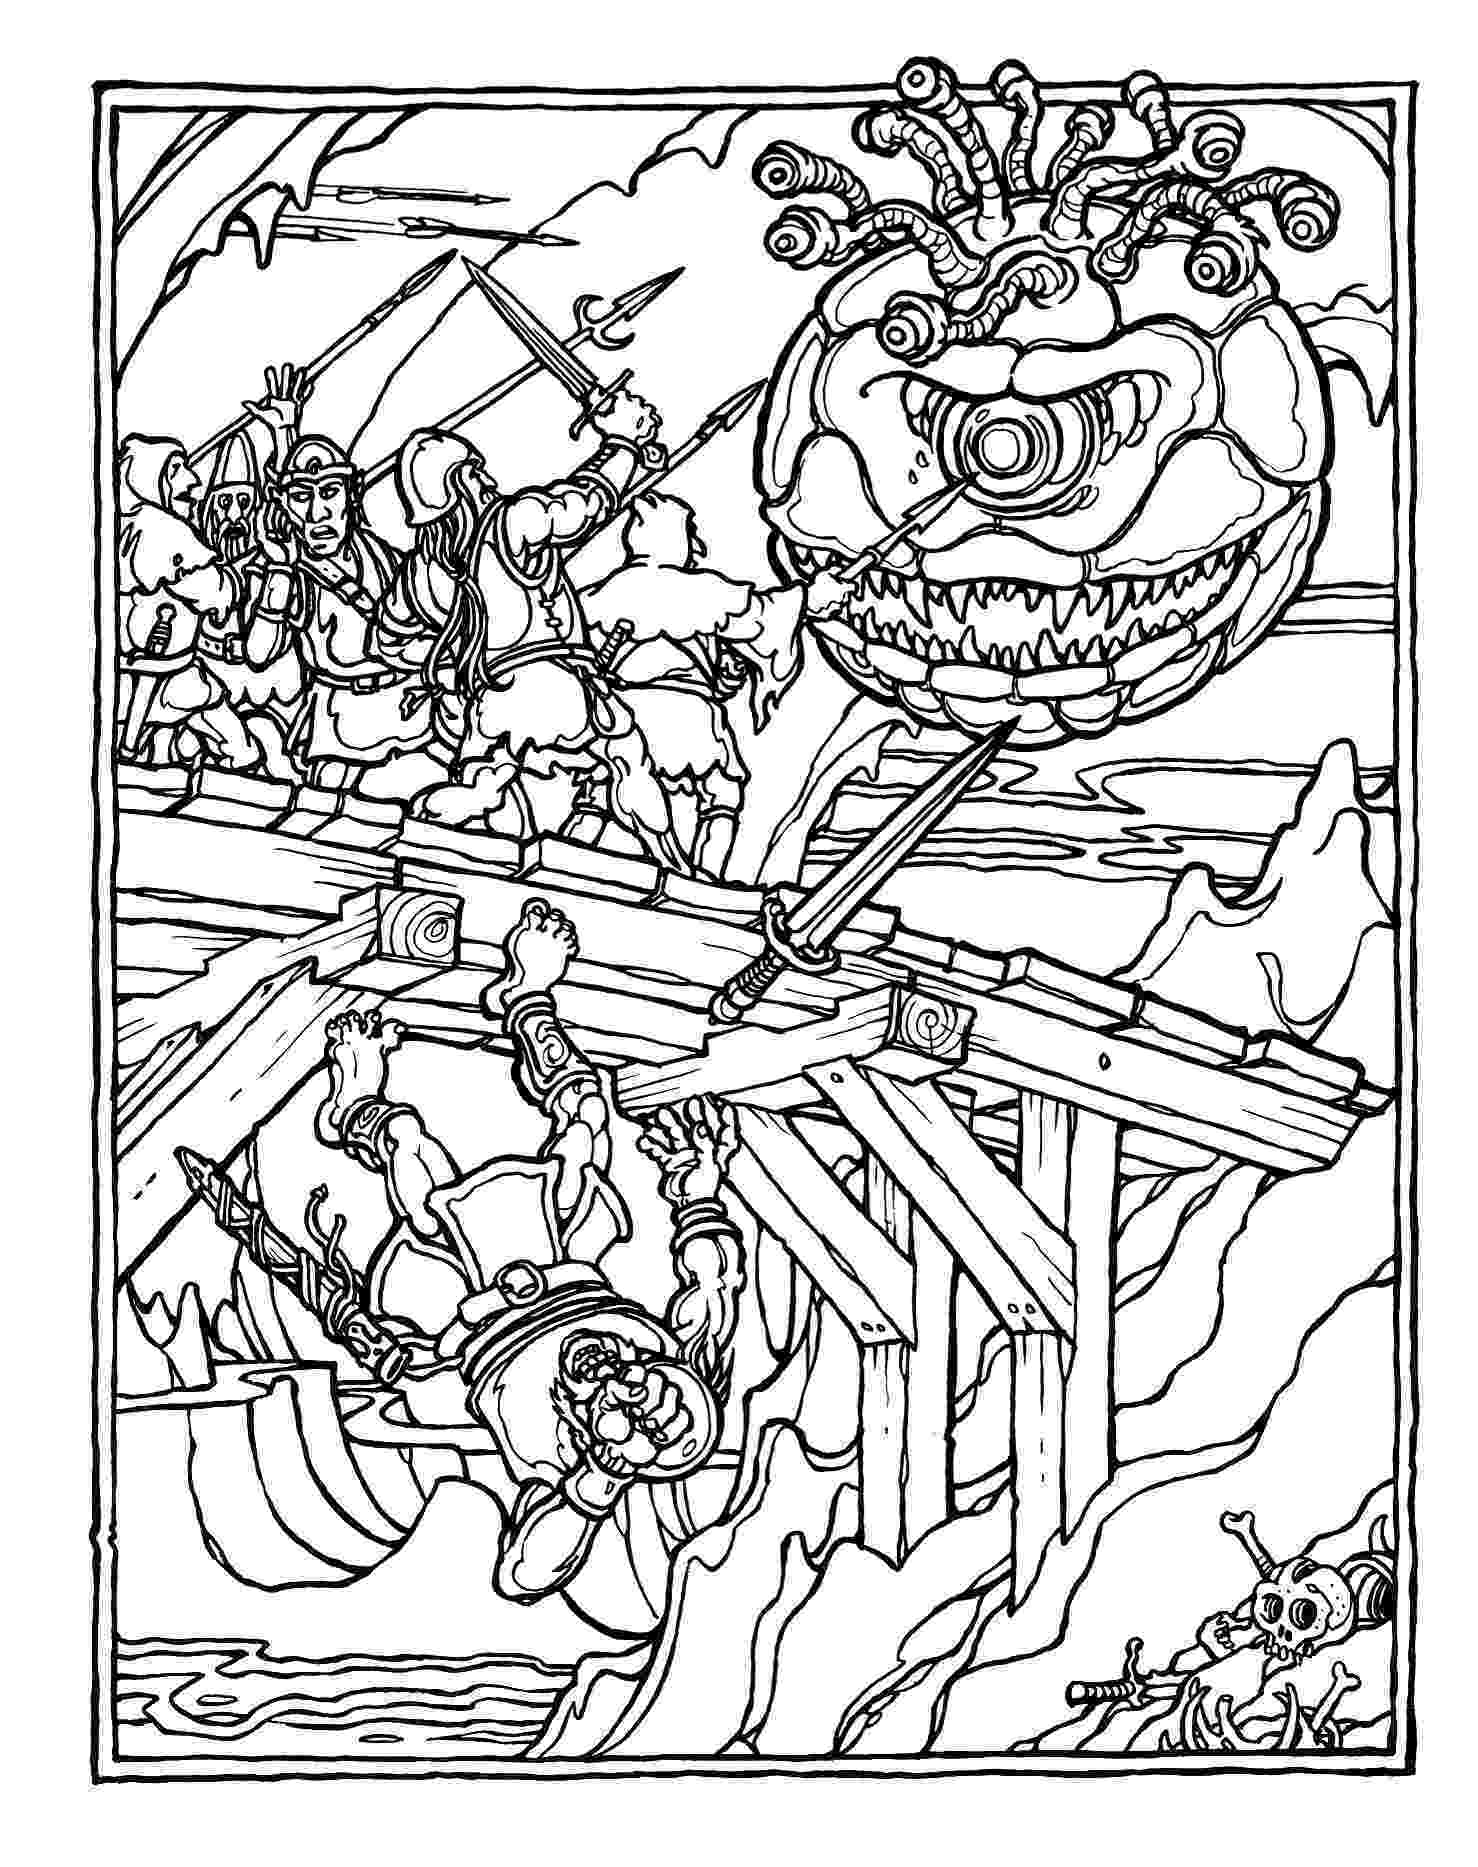 coloring page book monster brains the official advanced dungeons and dragons book coloring page 